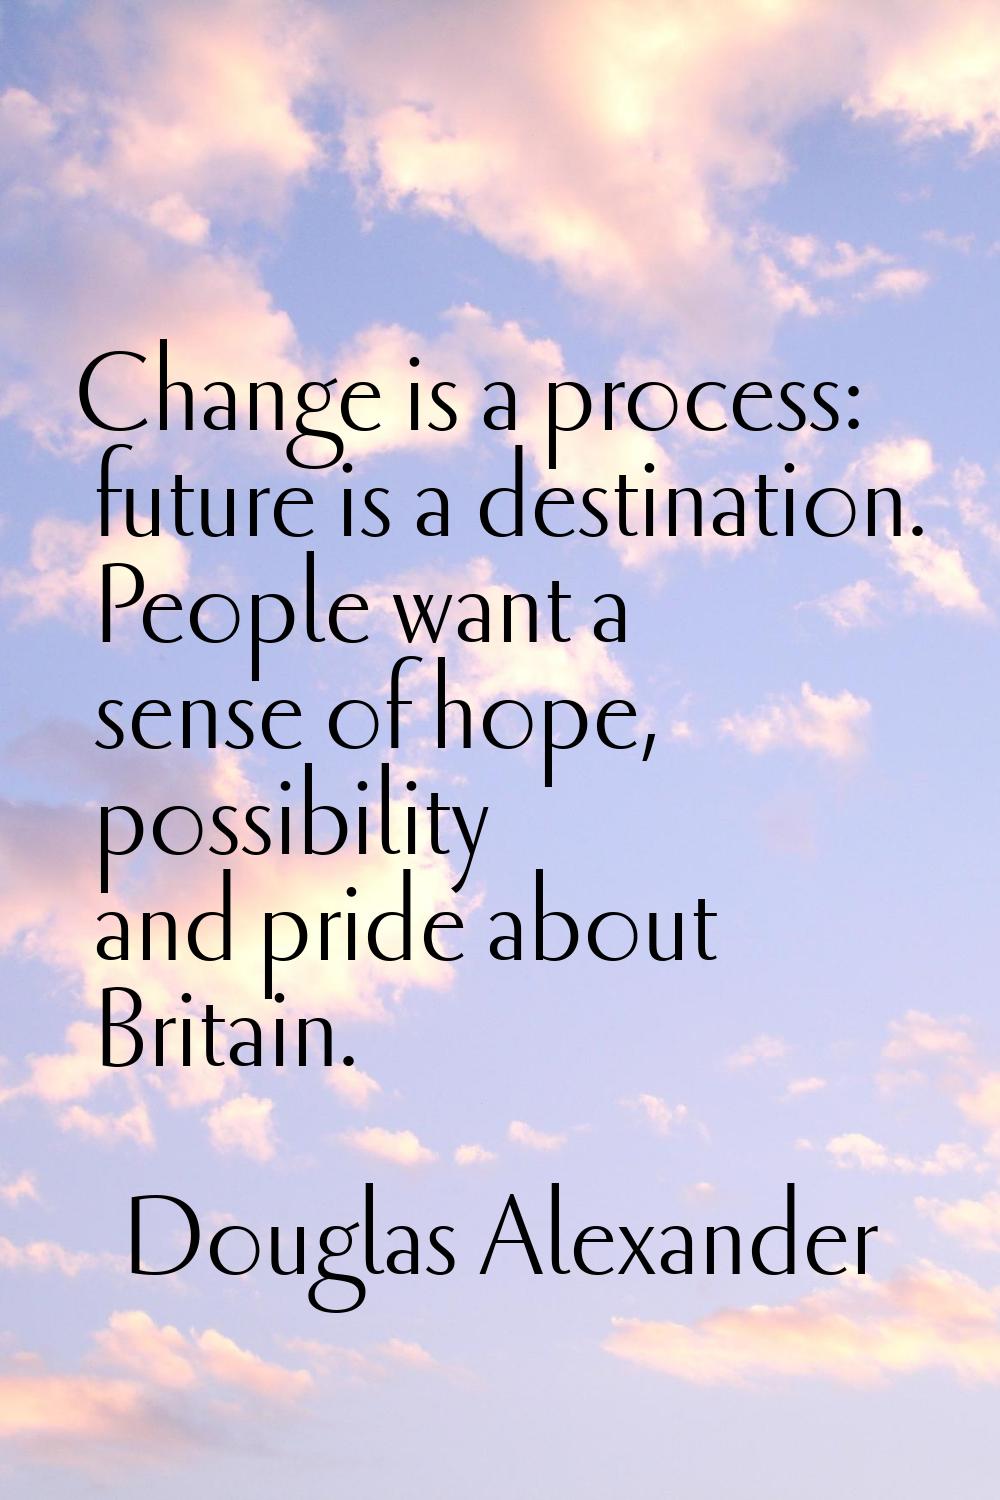 Change is a process: future is a destination. People want a sense of hope, possibility and pride ab